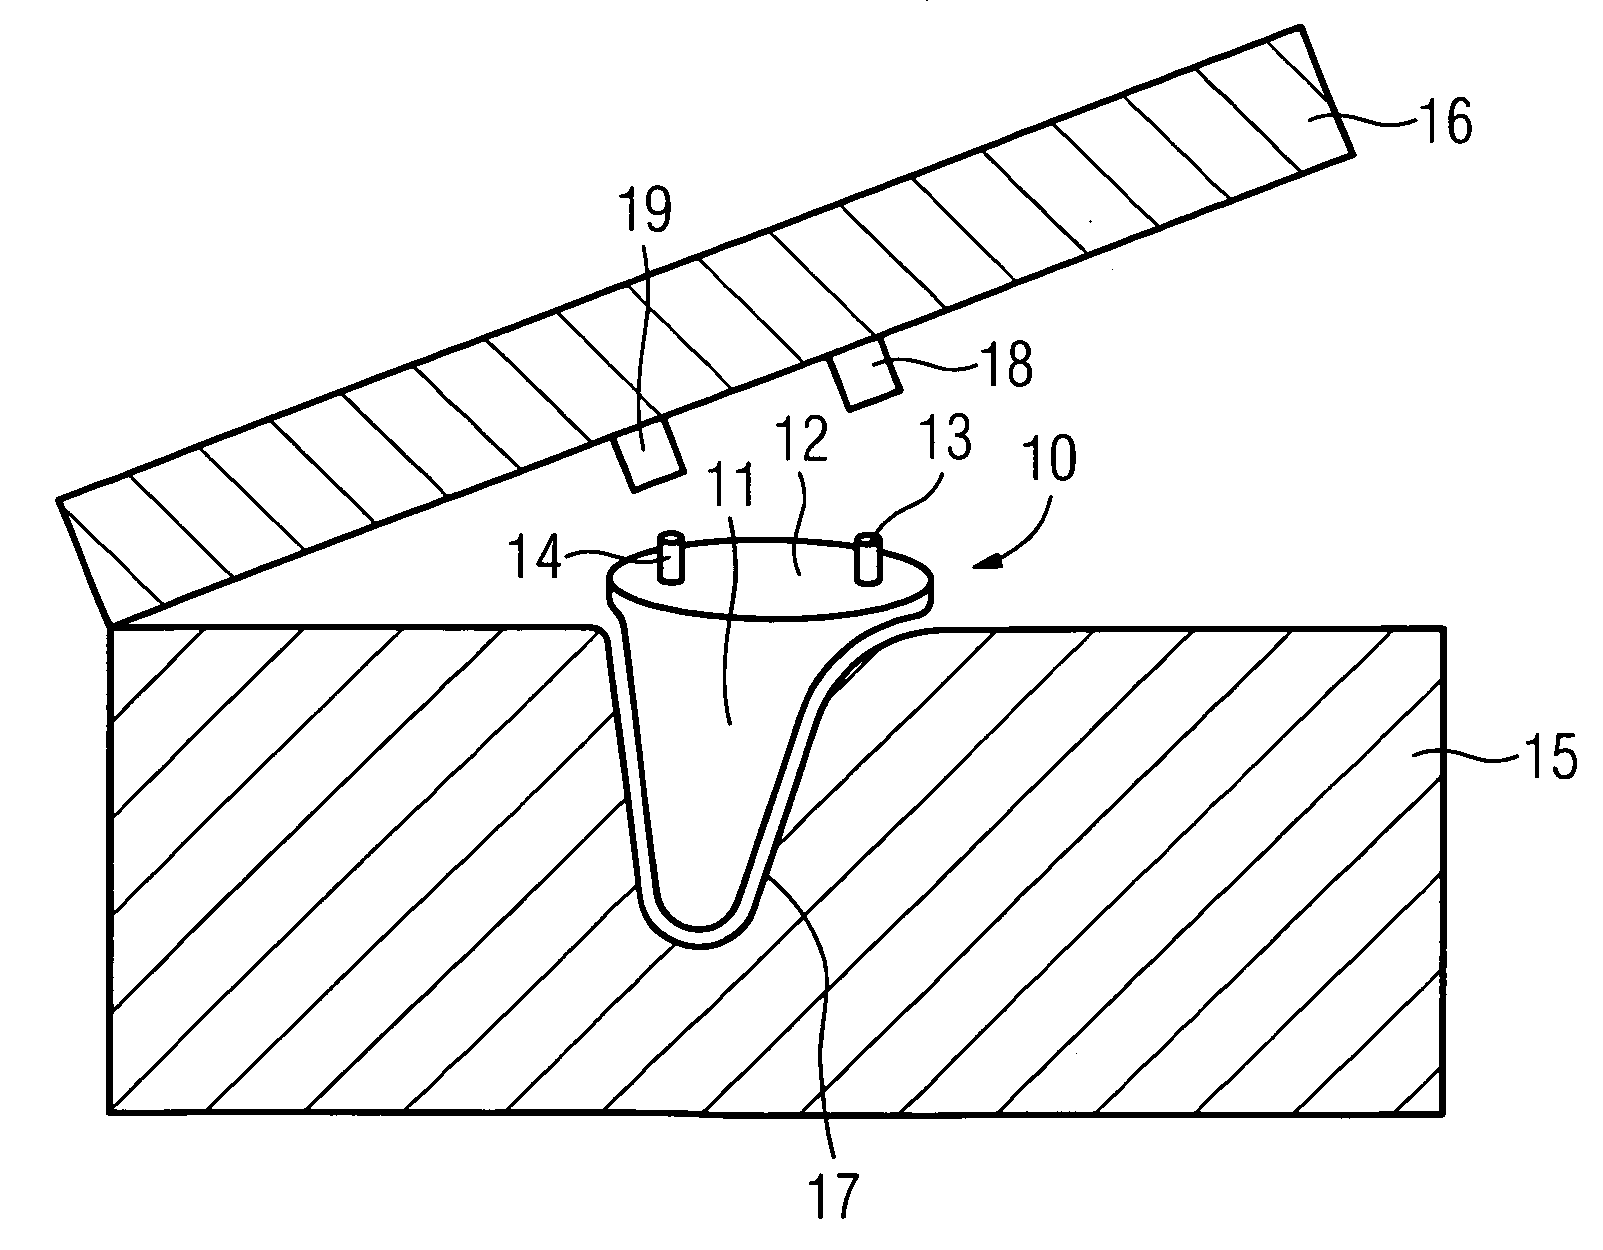 Charging device for a hearing apparatus with a moveable charging contact and associated hearing device system